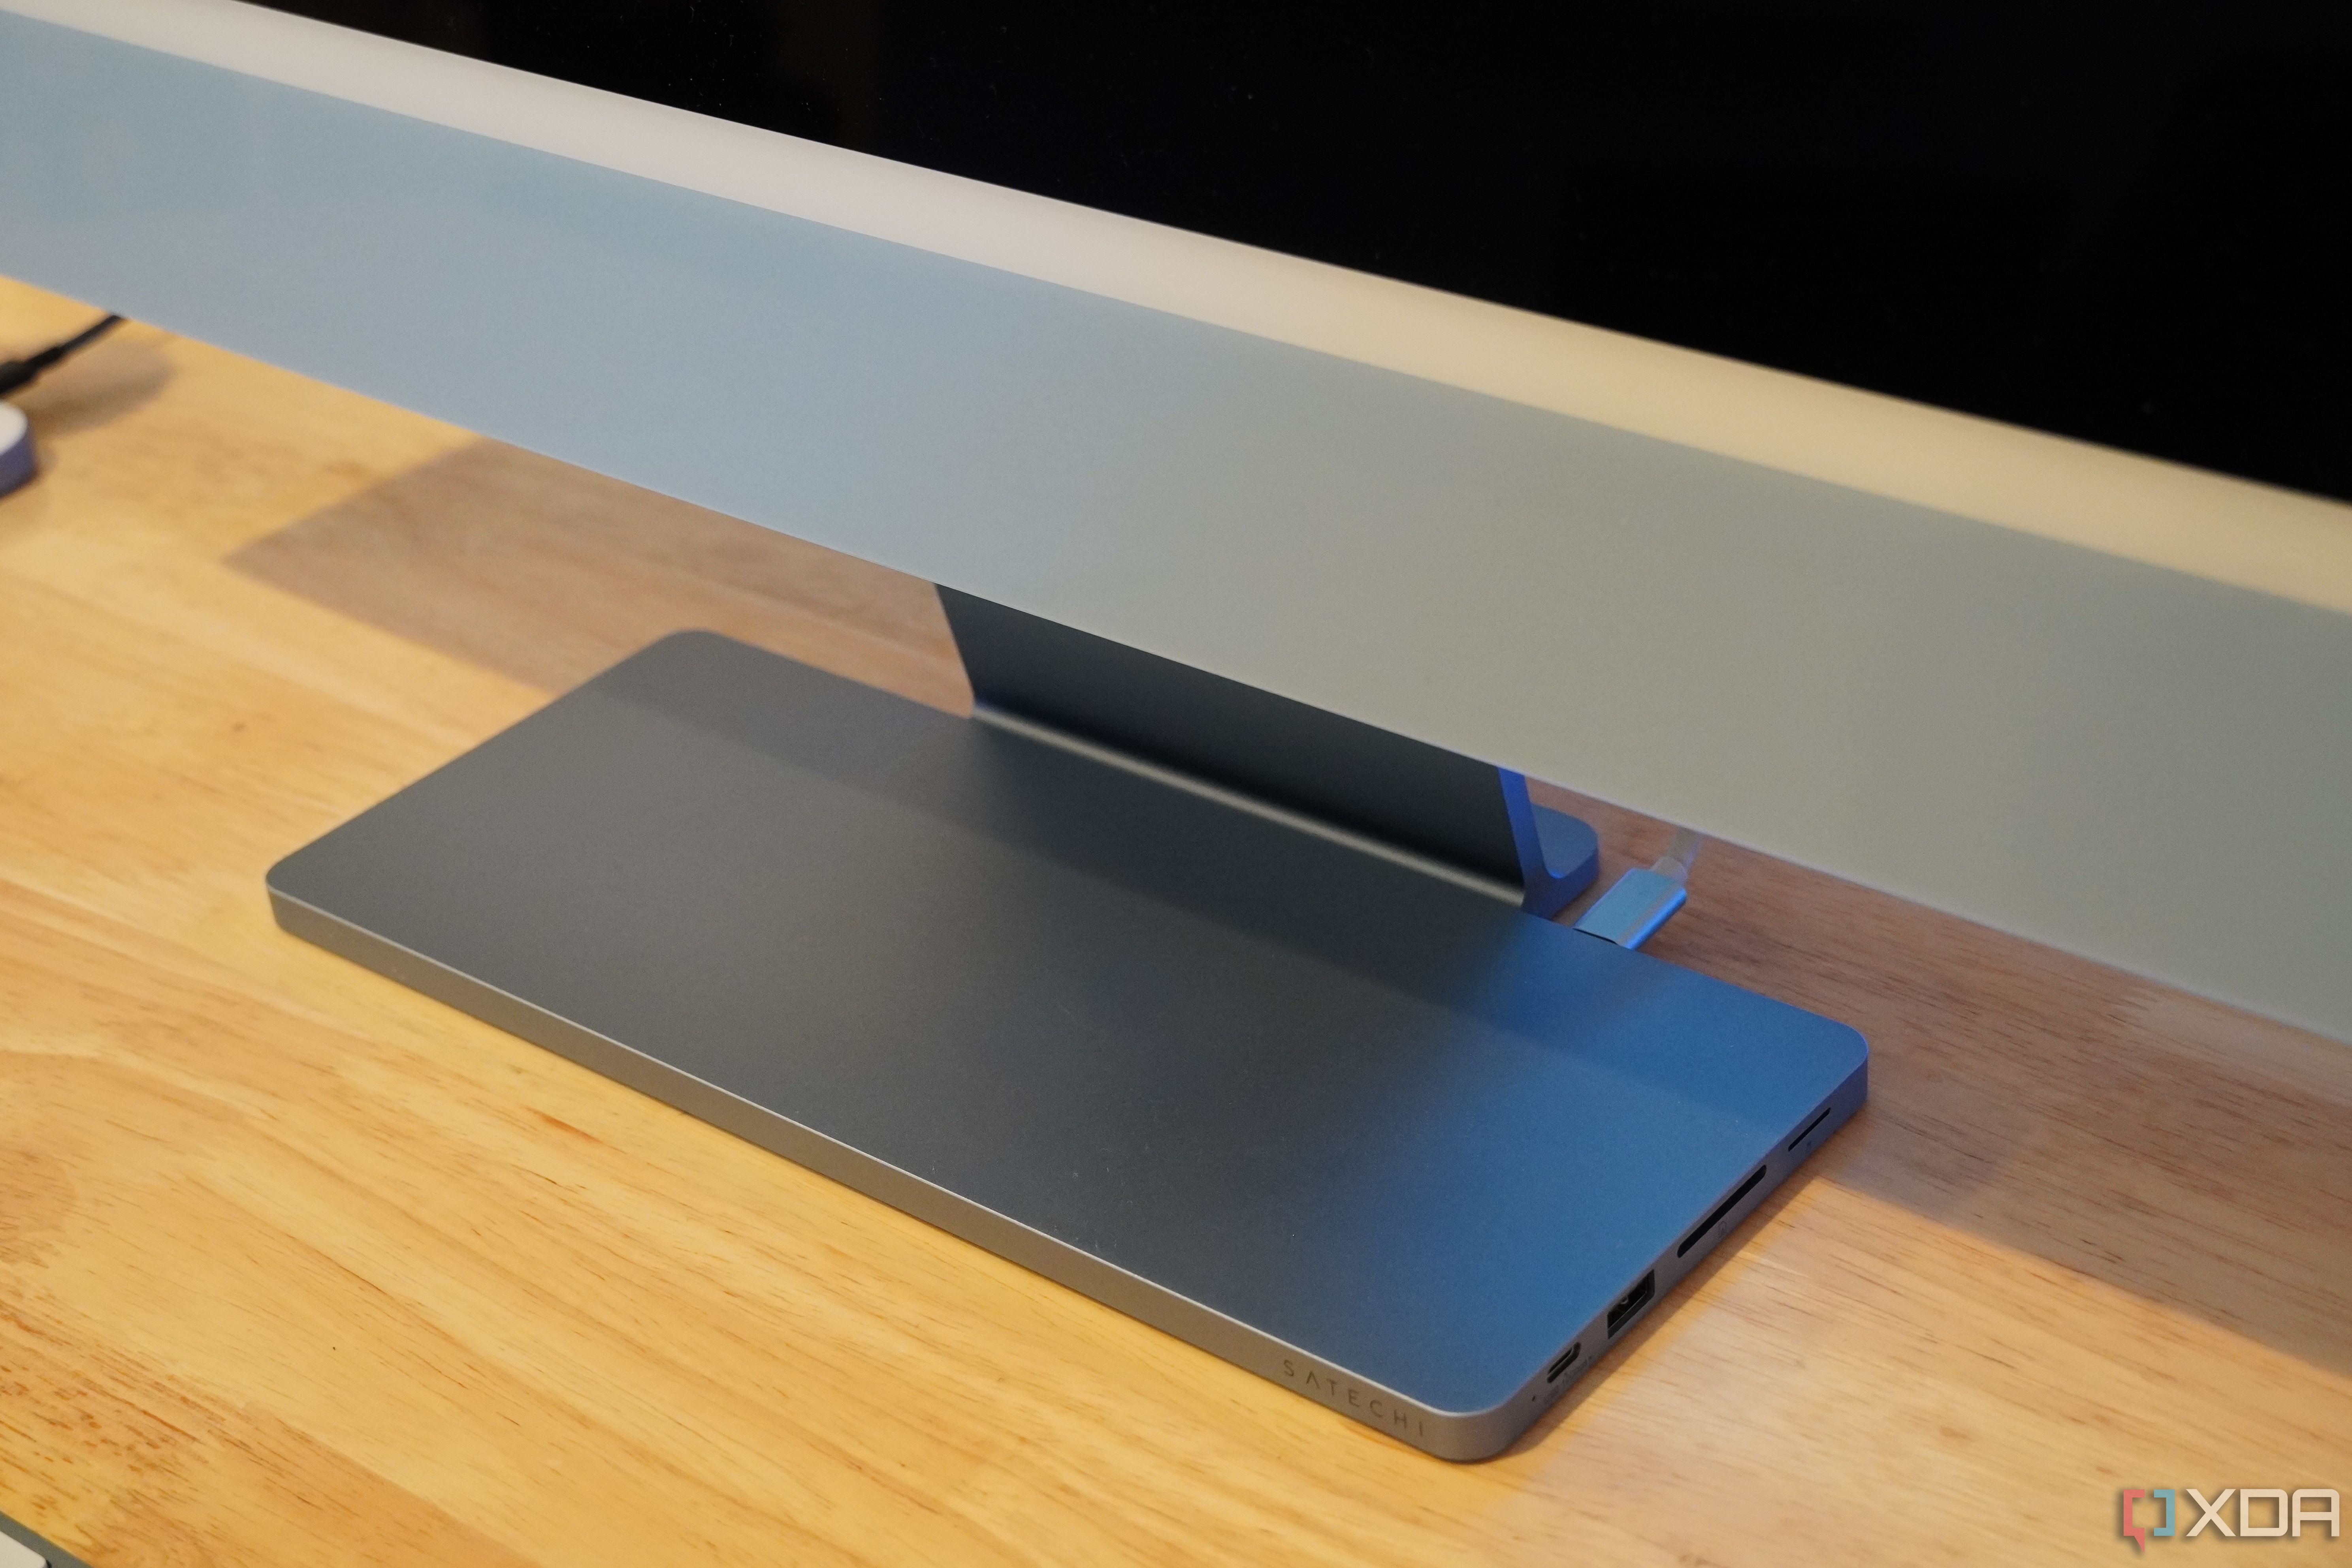 The Satechi USB-C Slim Dock at the base of a 24-inch iMac.